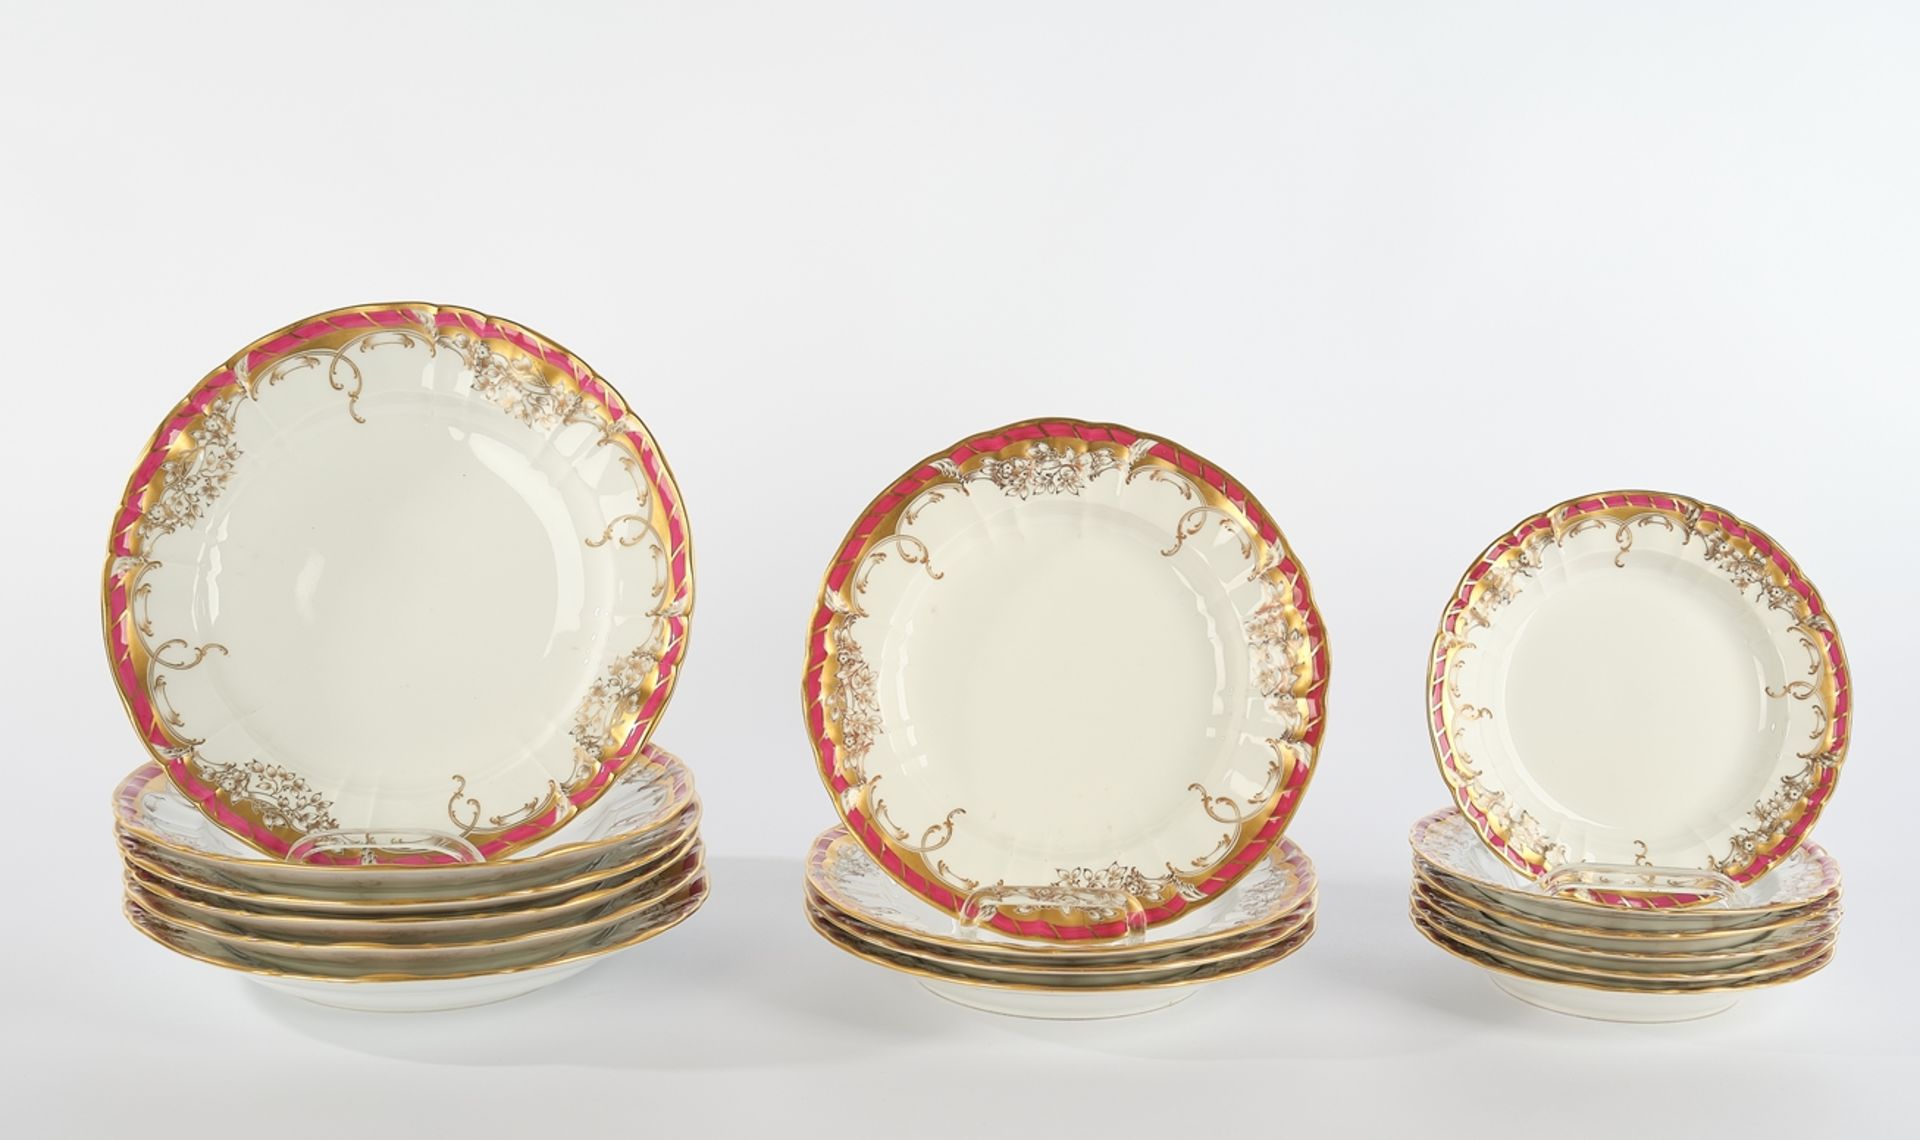 16 plates, KPM Berlin, rocaille, decoration 24 Queen of Holland, decorated in red and gold, gold ri